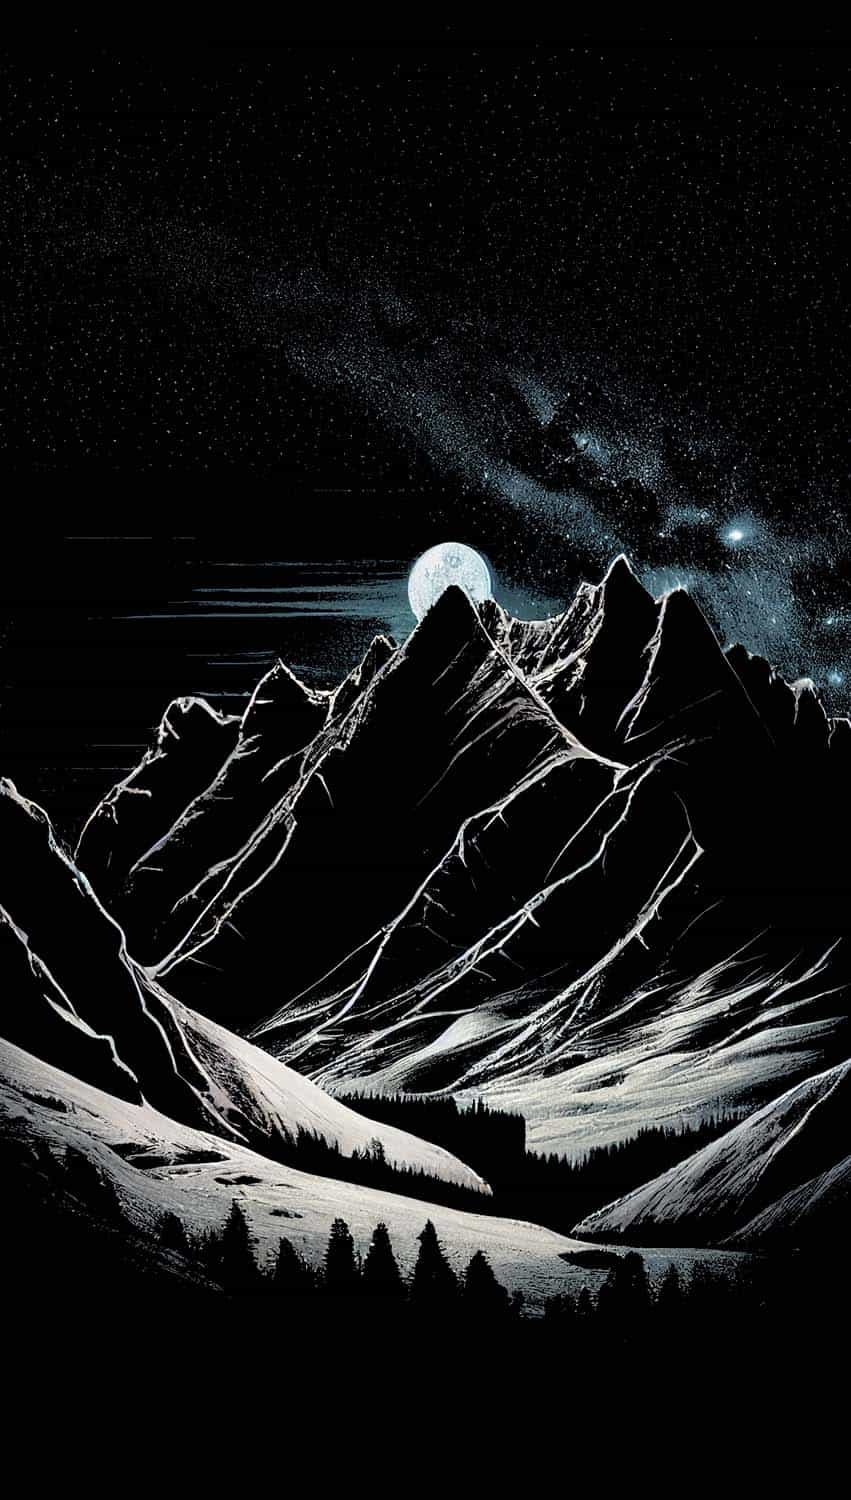 Dark Snow Night Mountains IPhone Wallpaper HD  IPhone Wallpapers